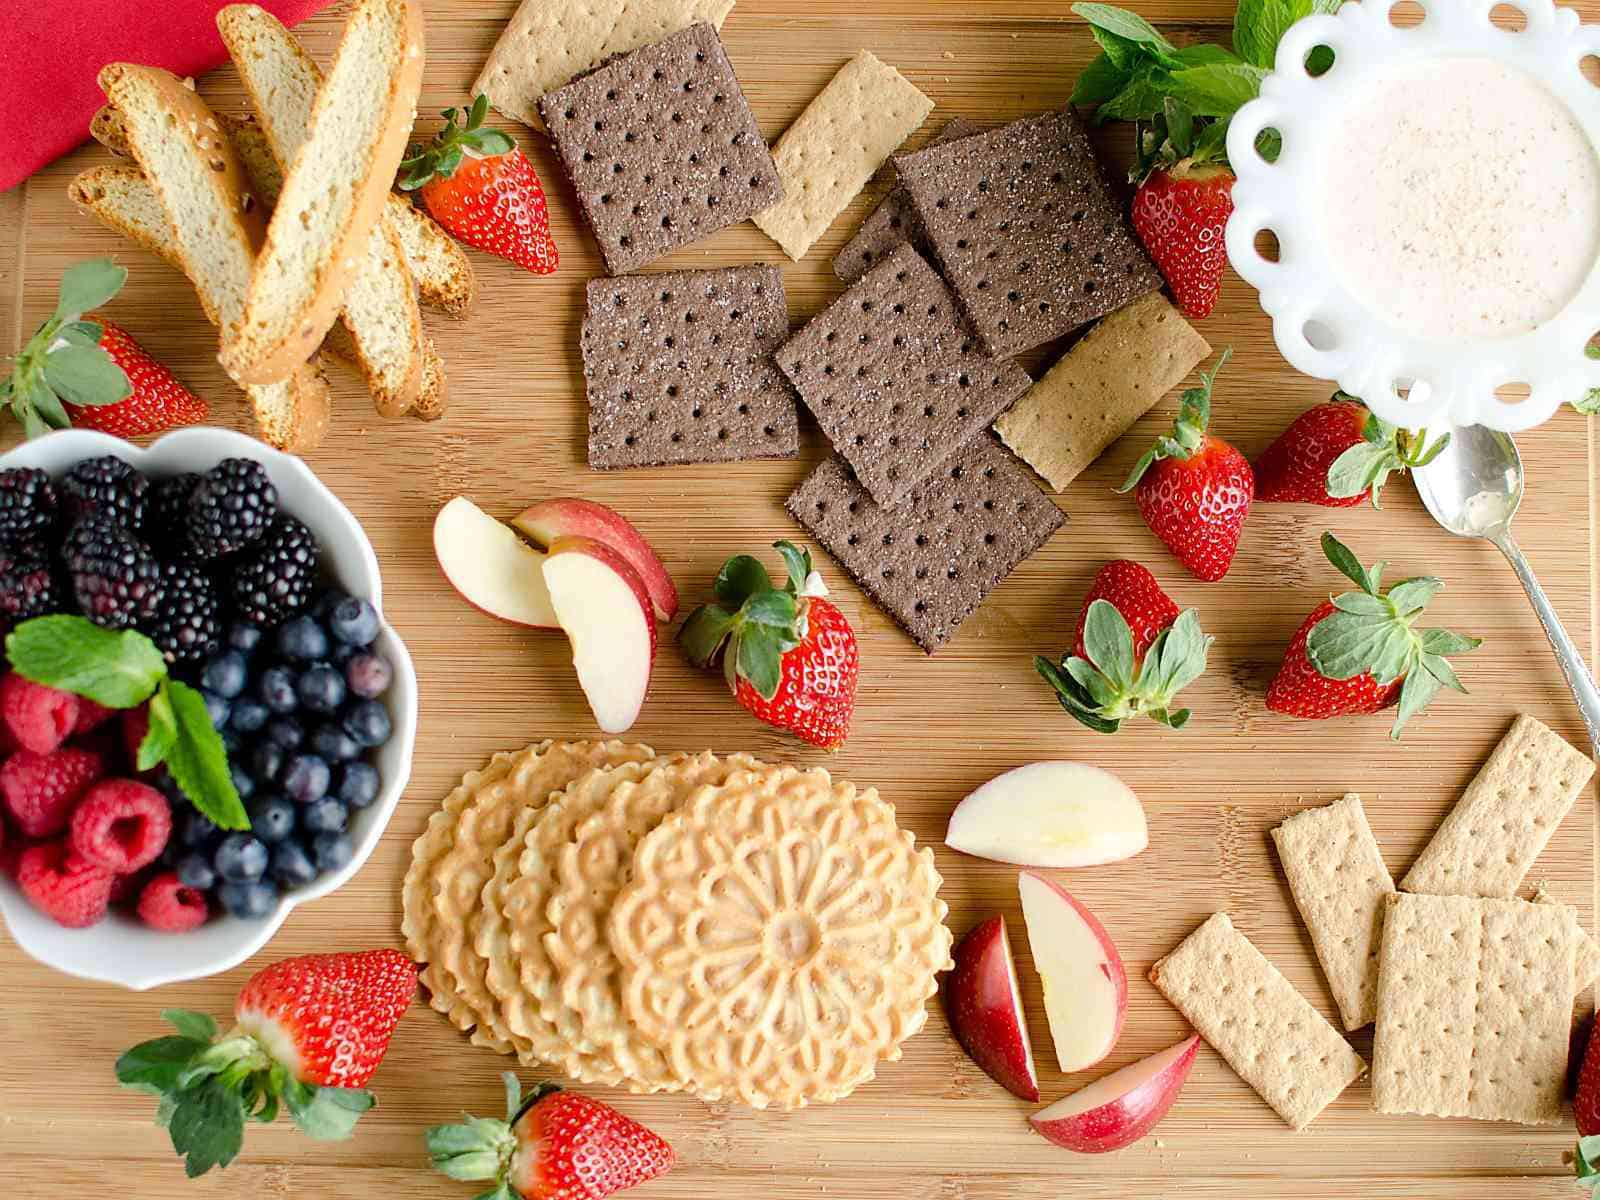 dessert board with fresh fruit, eggnog dip, and crackers for dipping.